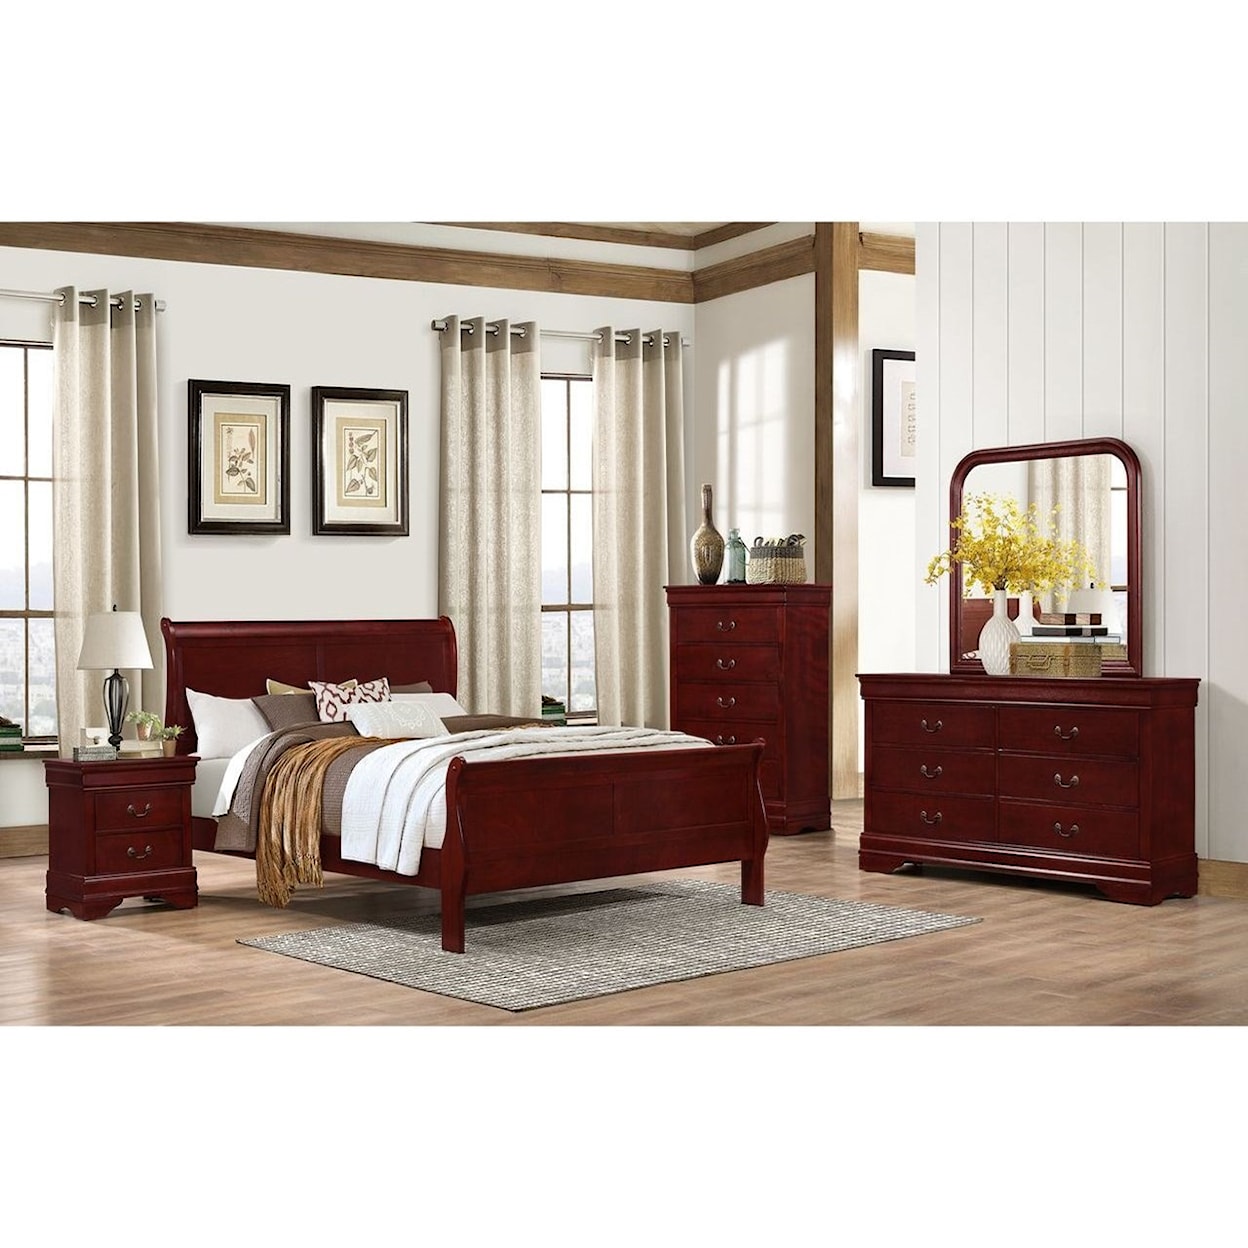 Lifestyle 4937 Full Sleigh Bed